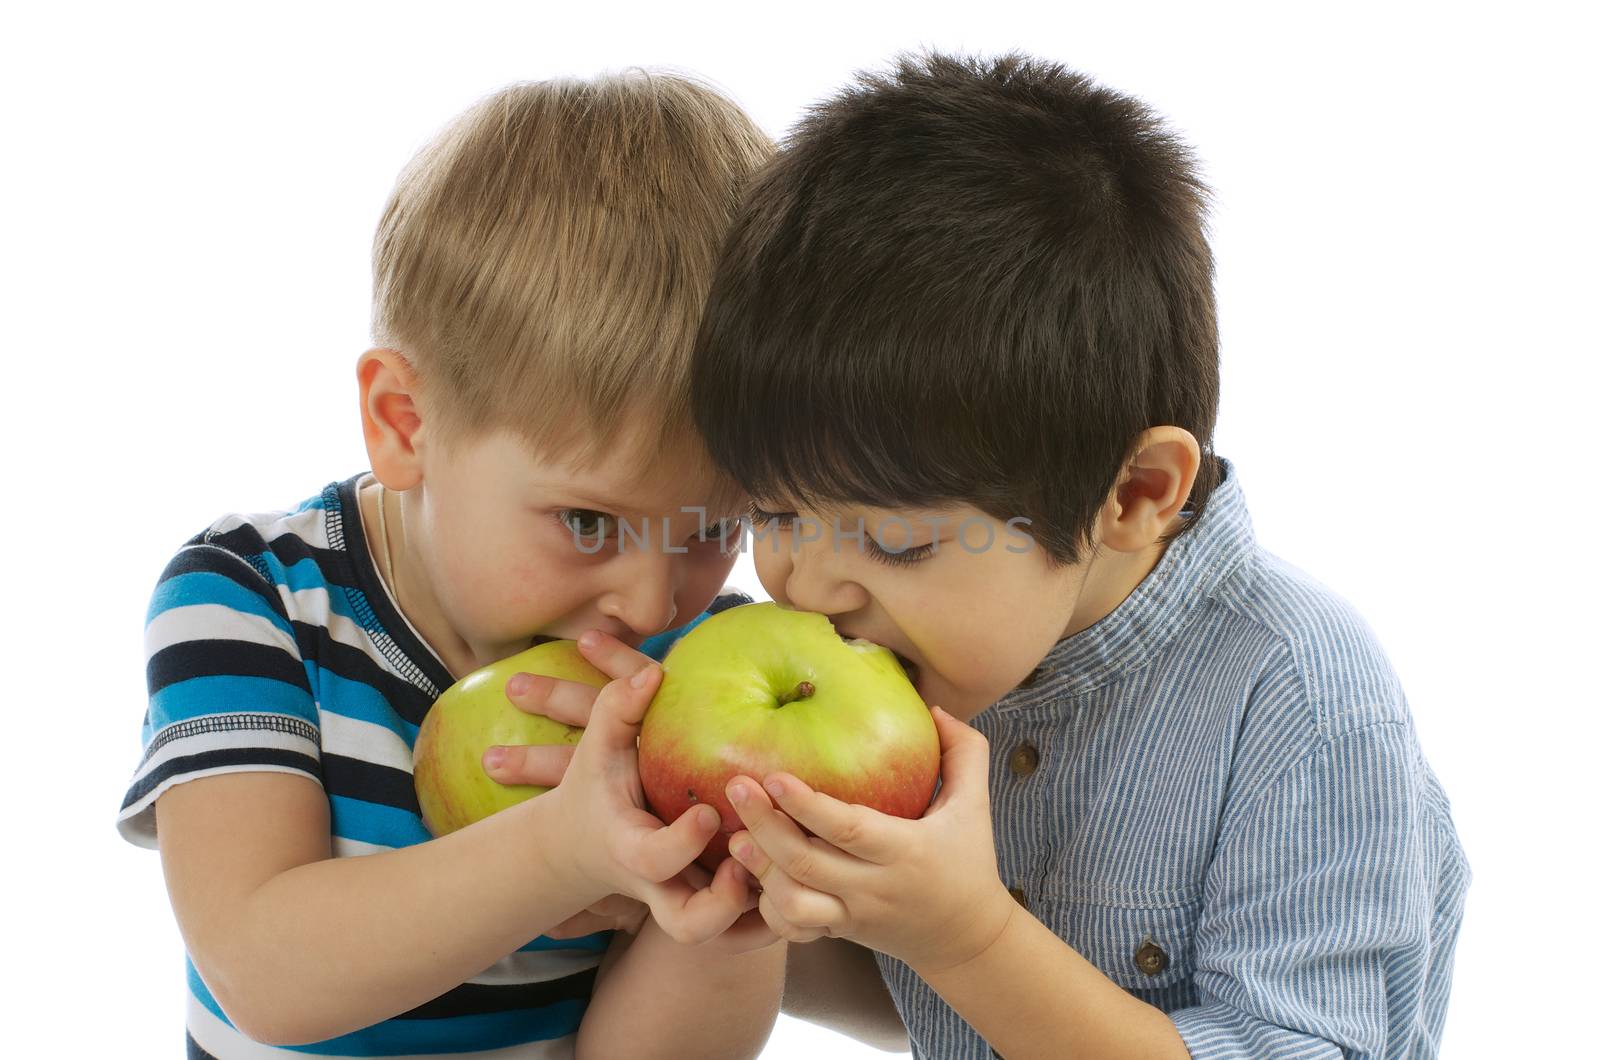 Two Little Boys Sharing an Apples to Each other and Eating